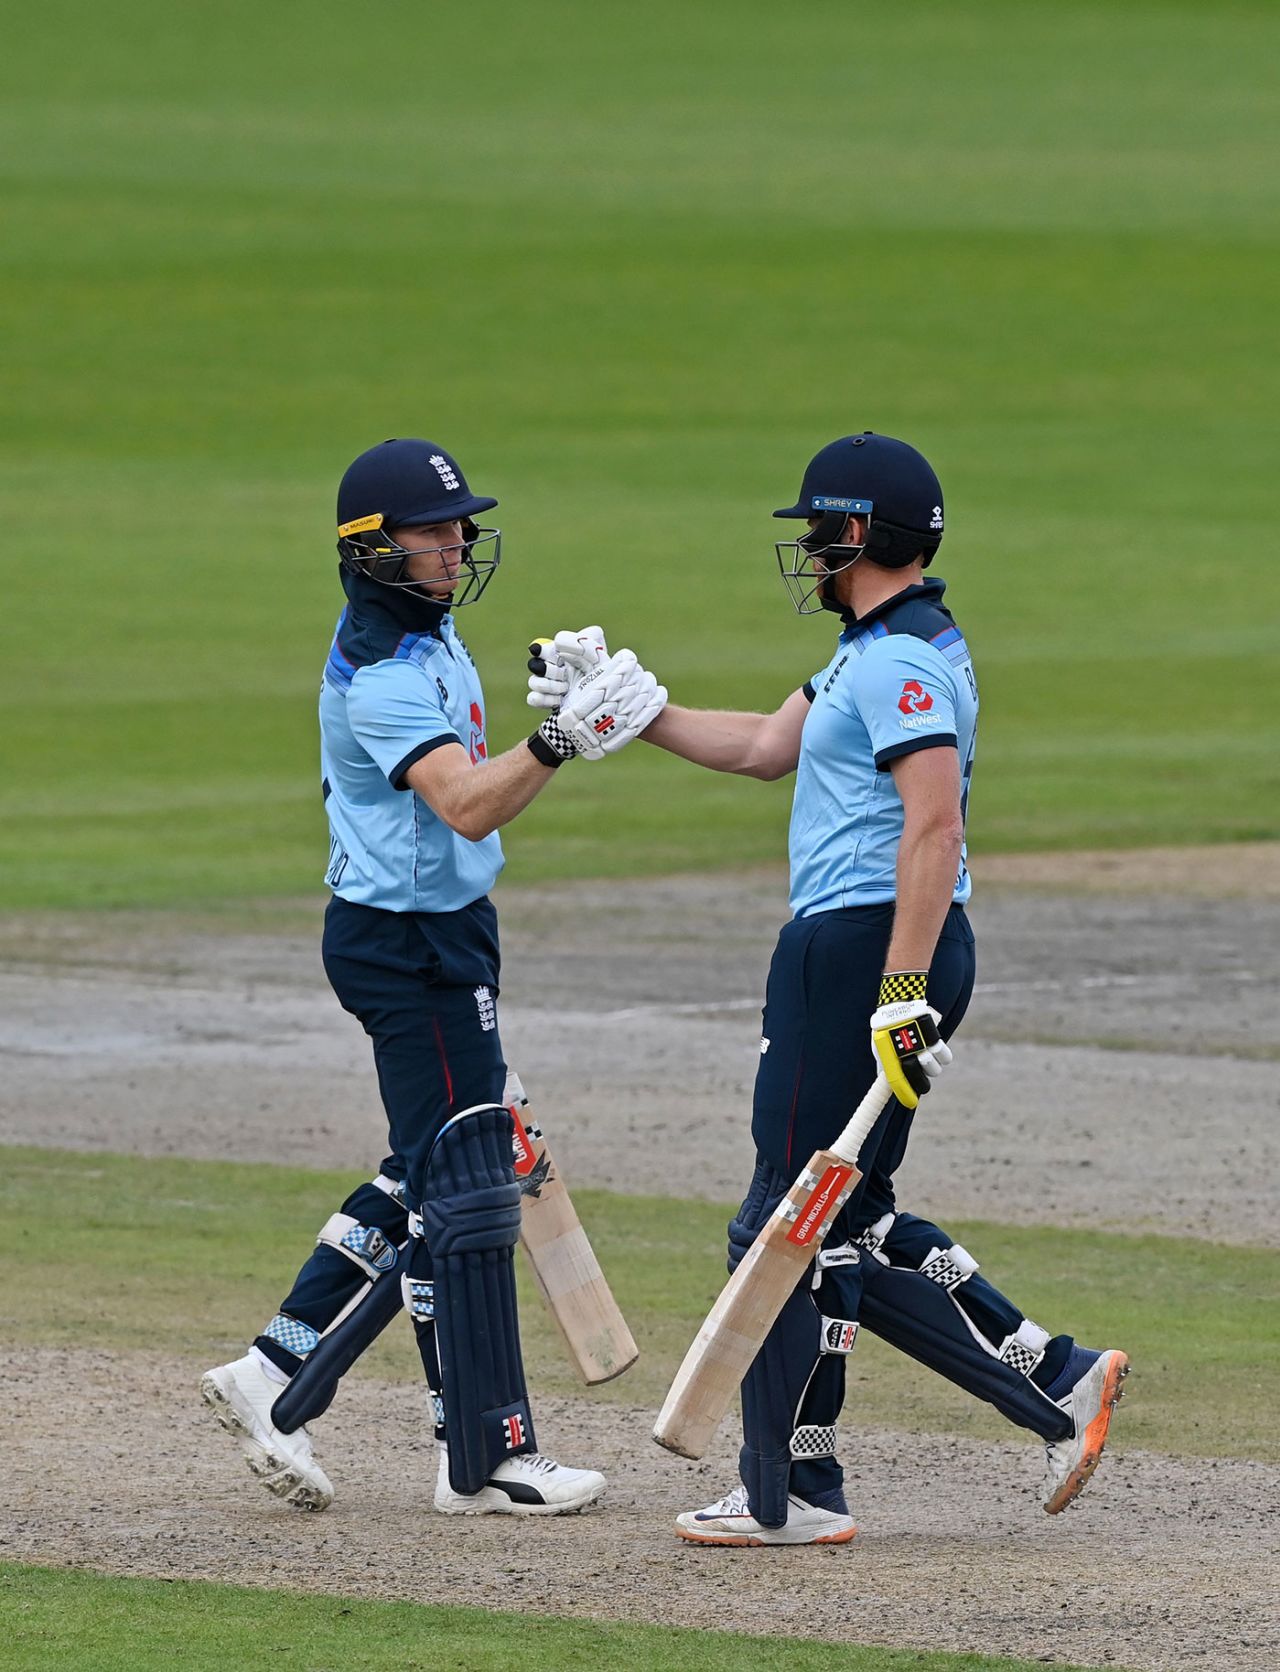 Jonny Bairstow and Sam Billings combined for a crucial partnership, England v Australia, 3rd ODI, Emirates Old Trafford, September 16, 2020